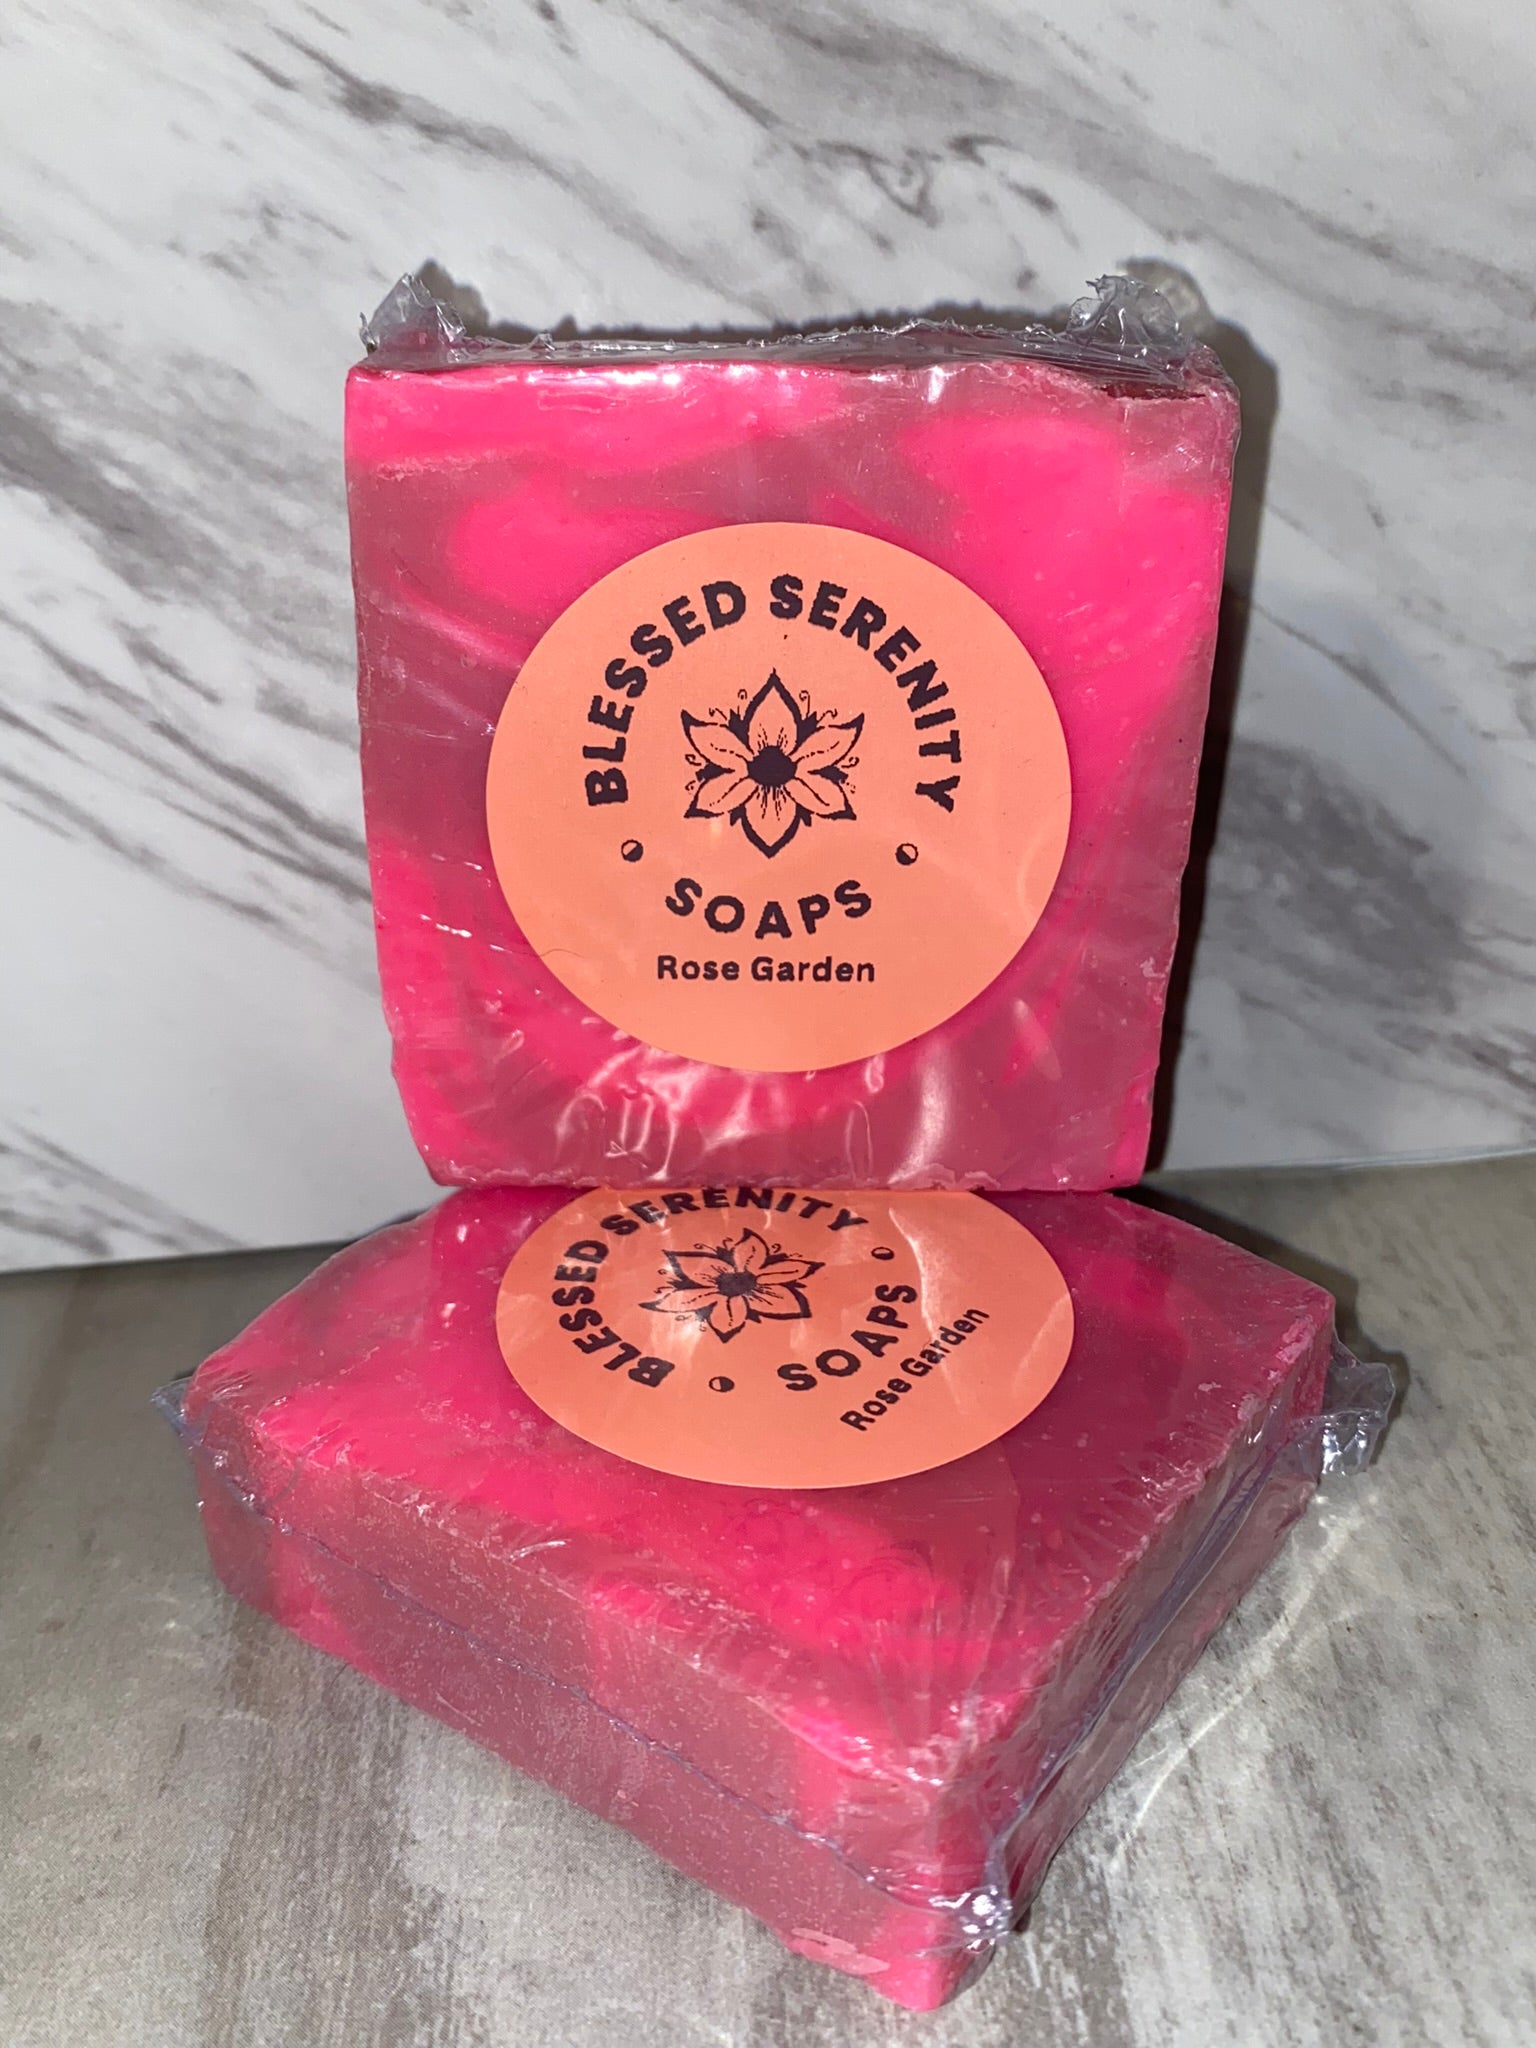 Two toned pink soap with pink label saying blessed Serenity Soaps rose garden